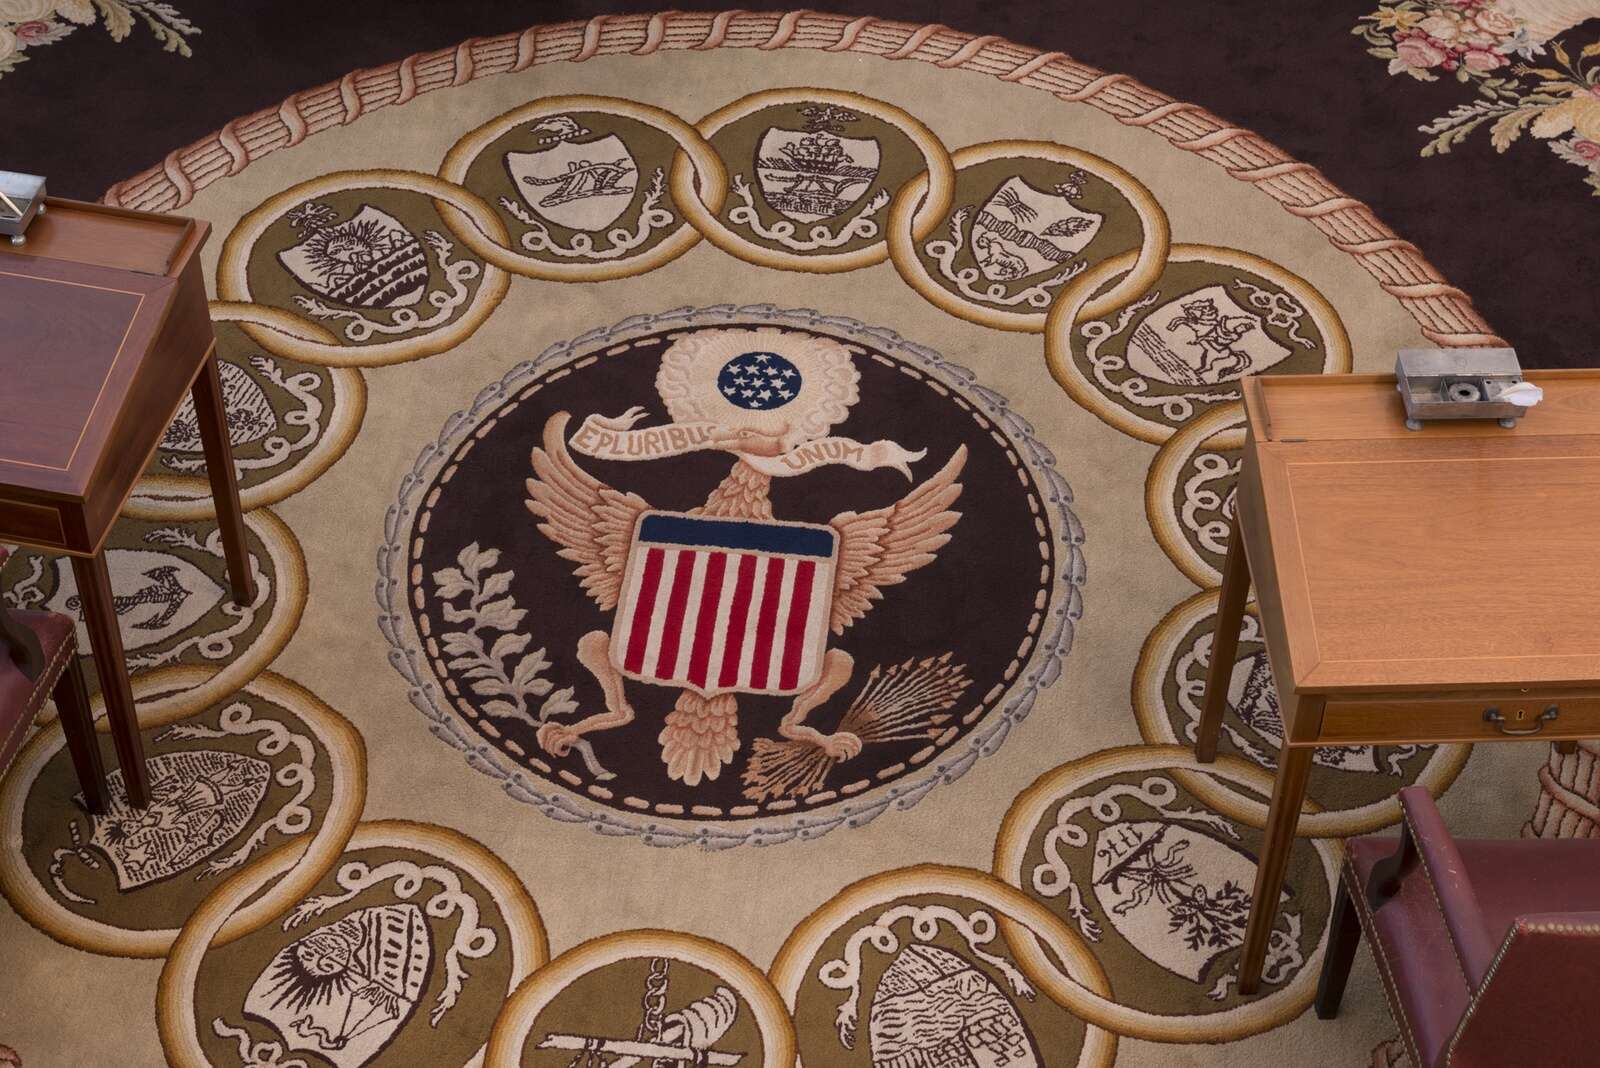 The carpet in the Senate Chamber featuring the Great Seal